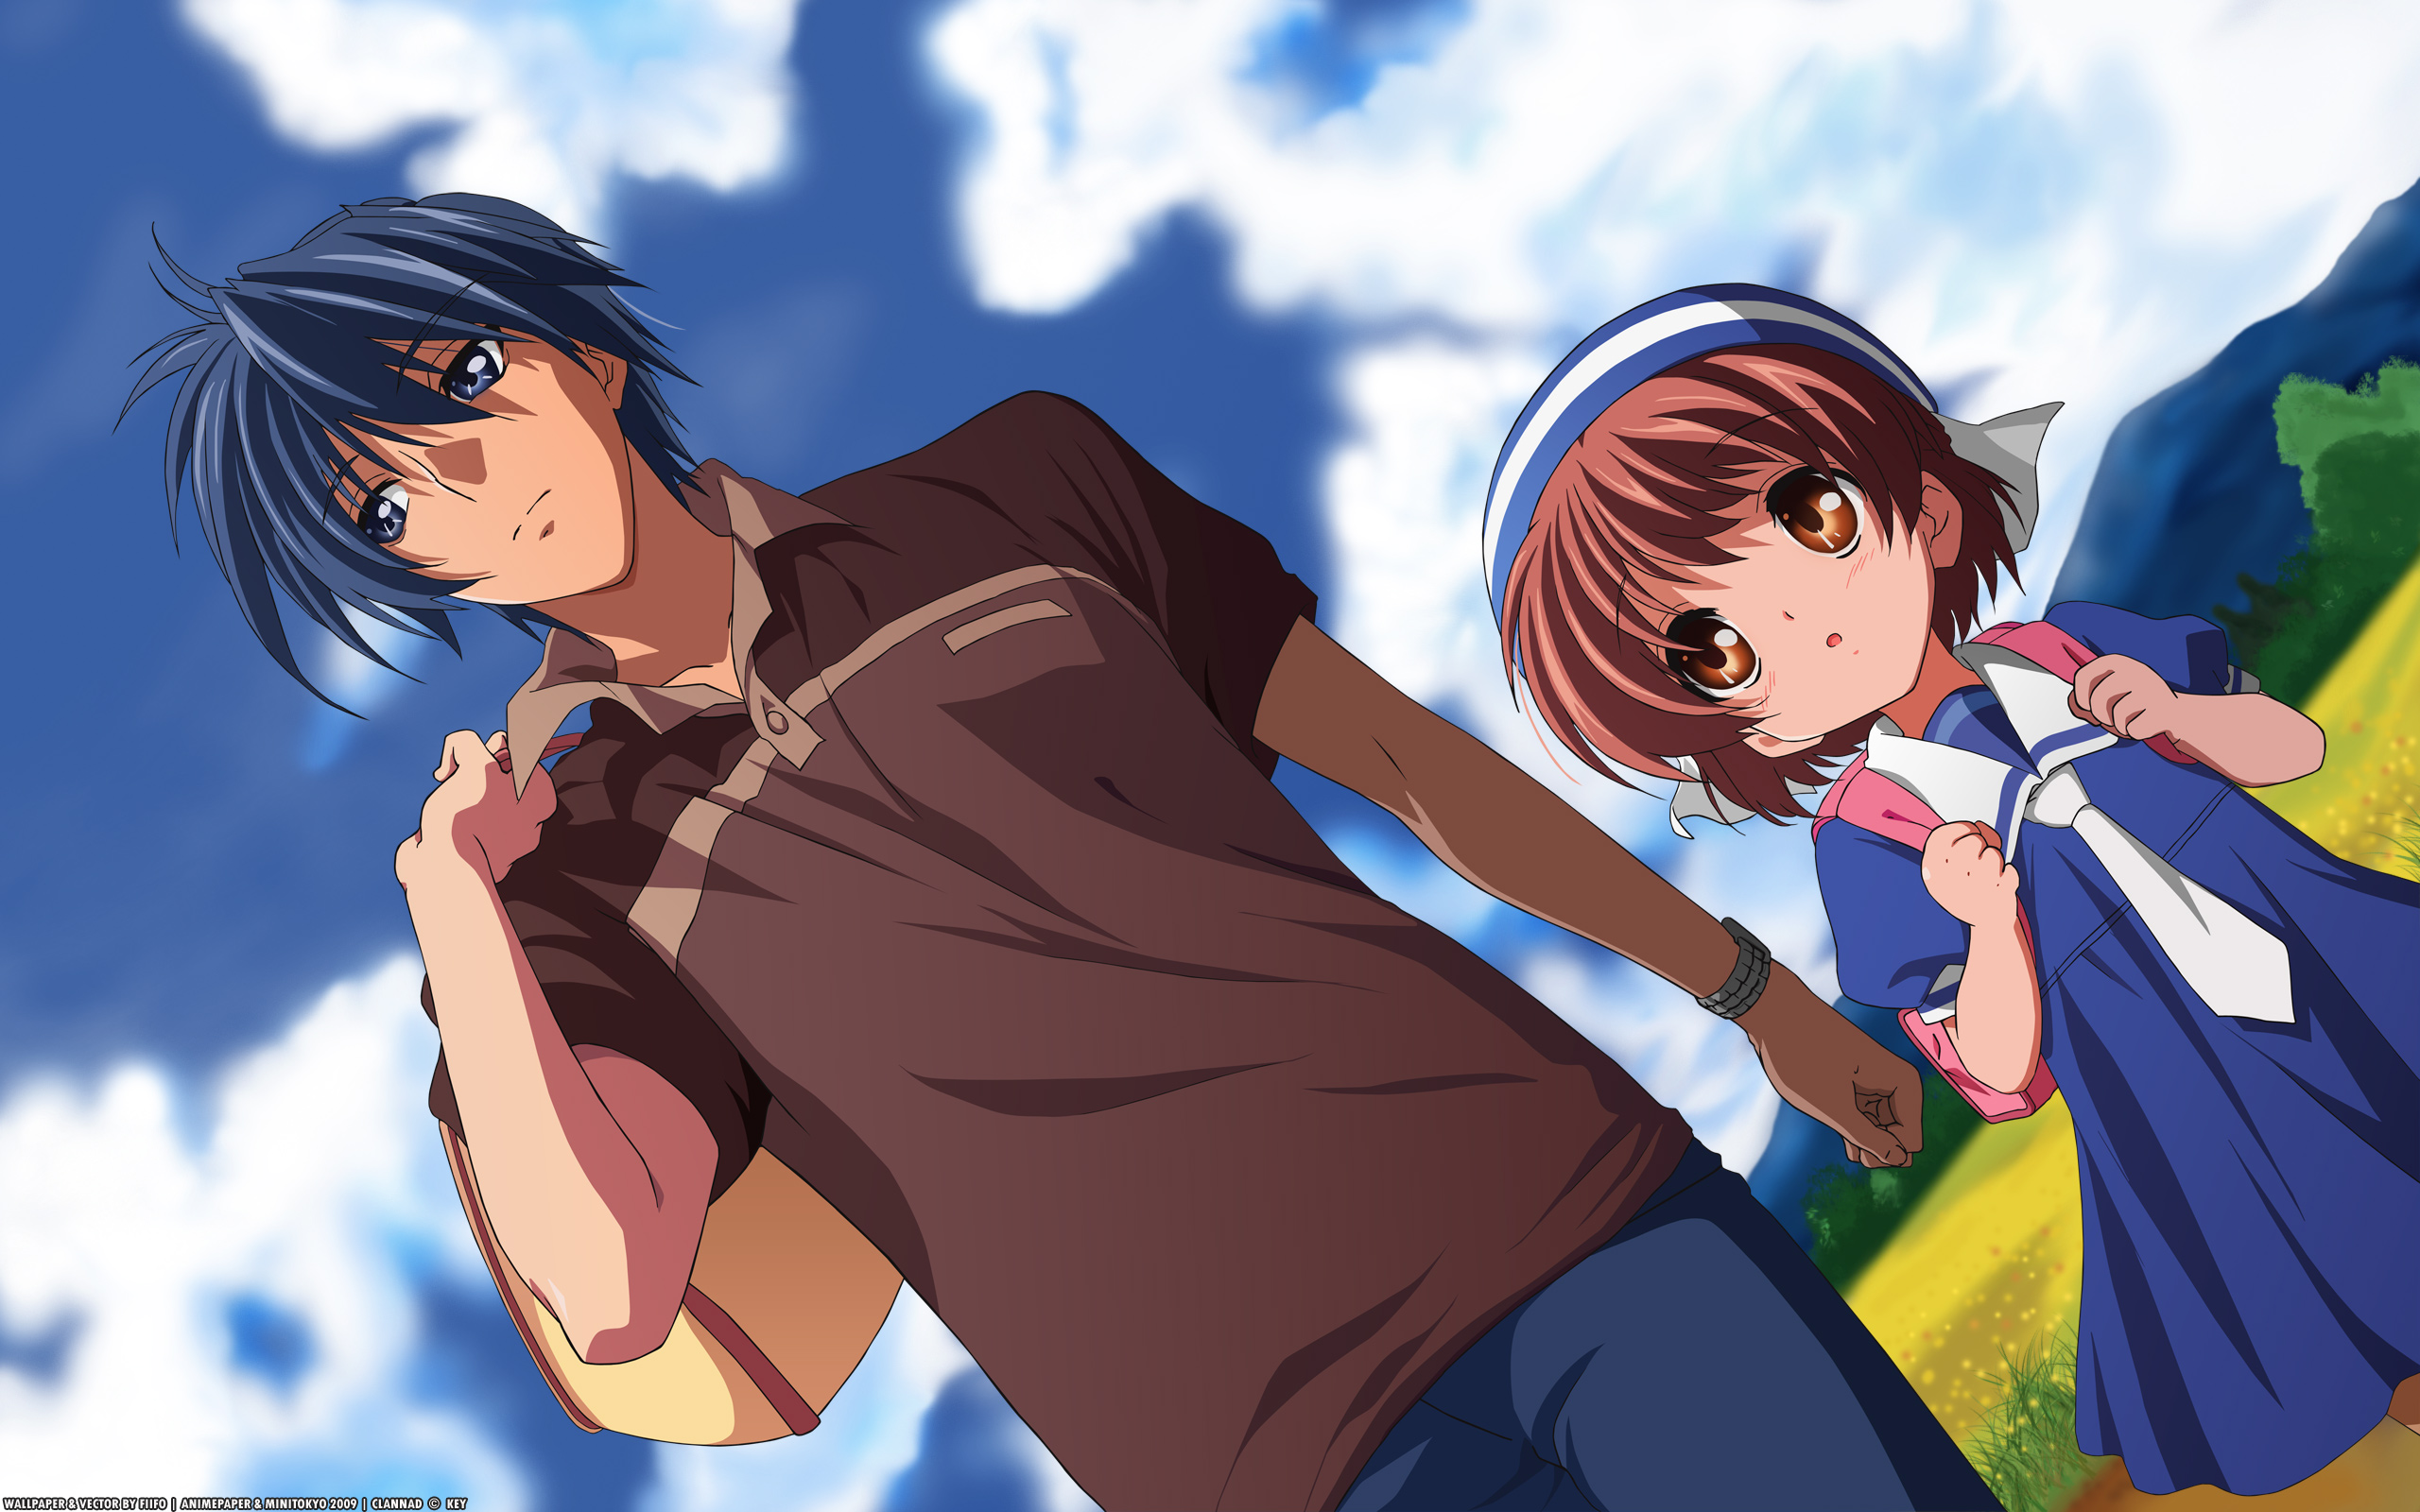 Anime Clannad HD Wallpaper Background Image. 